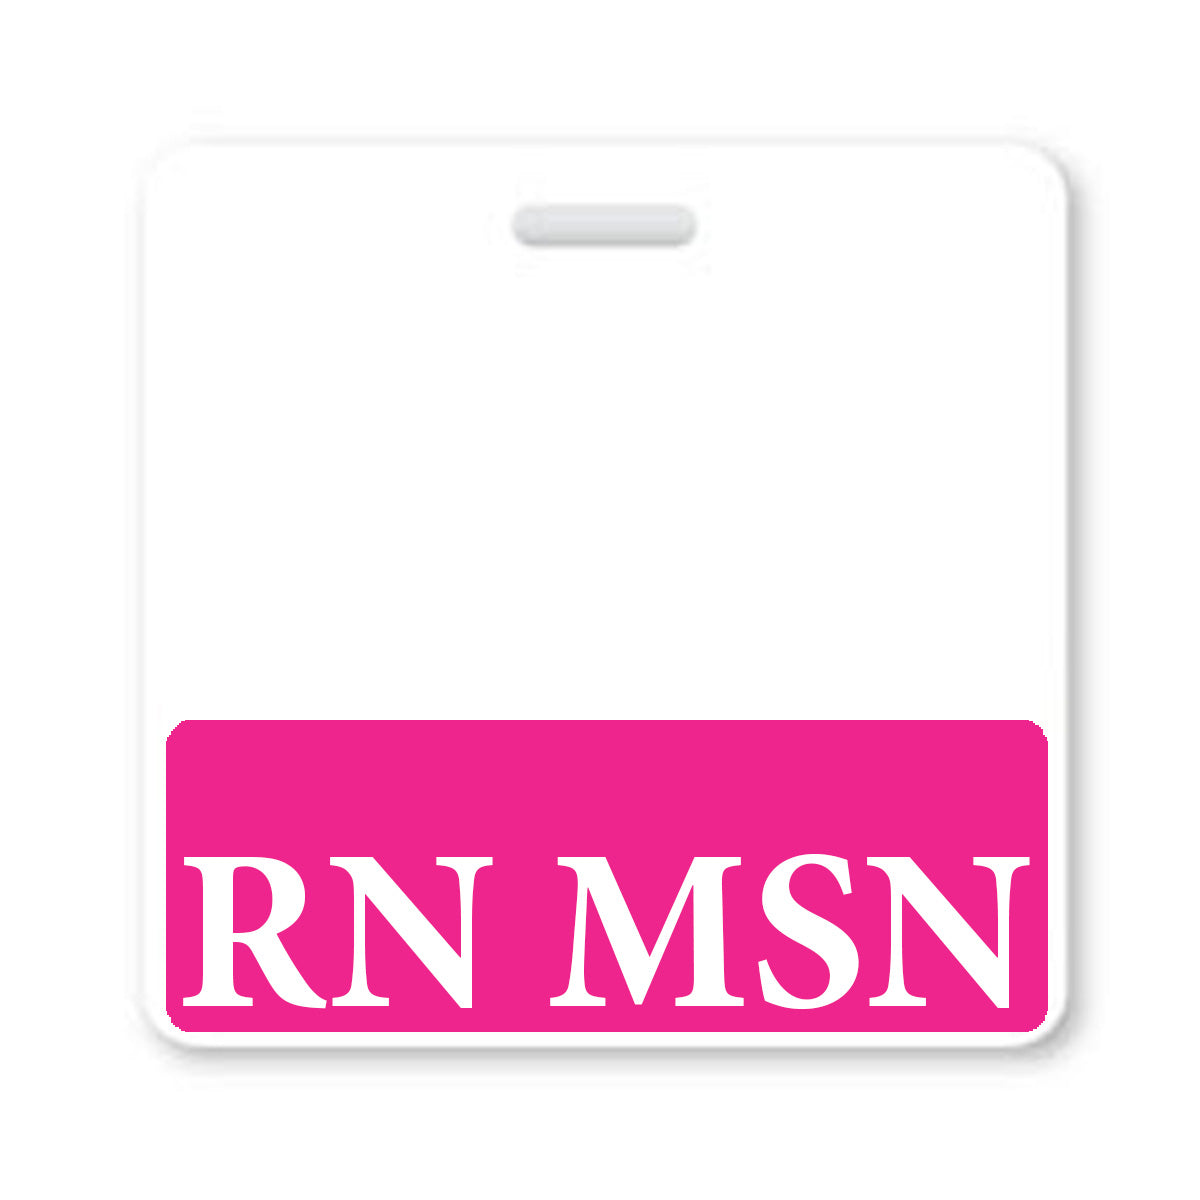 A white RN MSN Badge Buddy Horizontal for Nurse - Double Sided Print ID Badge Backer (Standard Size) with a pink section at the bottom displaying "RN MSN" in white letters. Perfect for a Nurse ID Badge or Hospital Badge Holder.